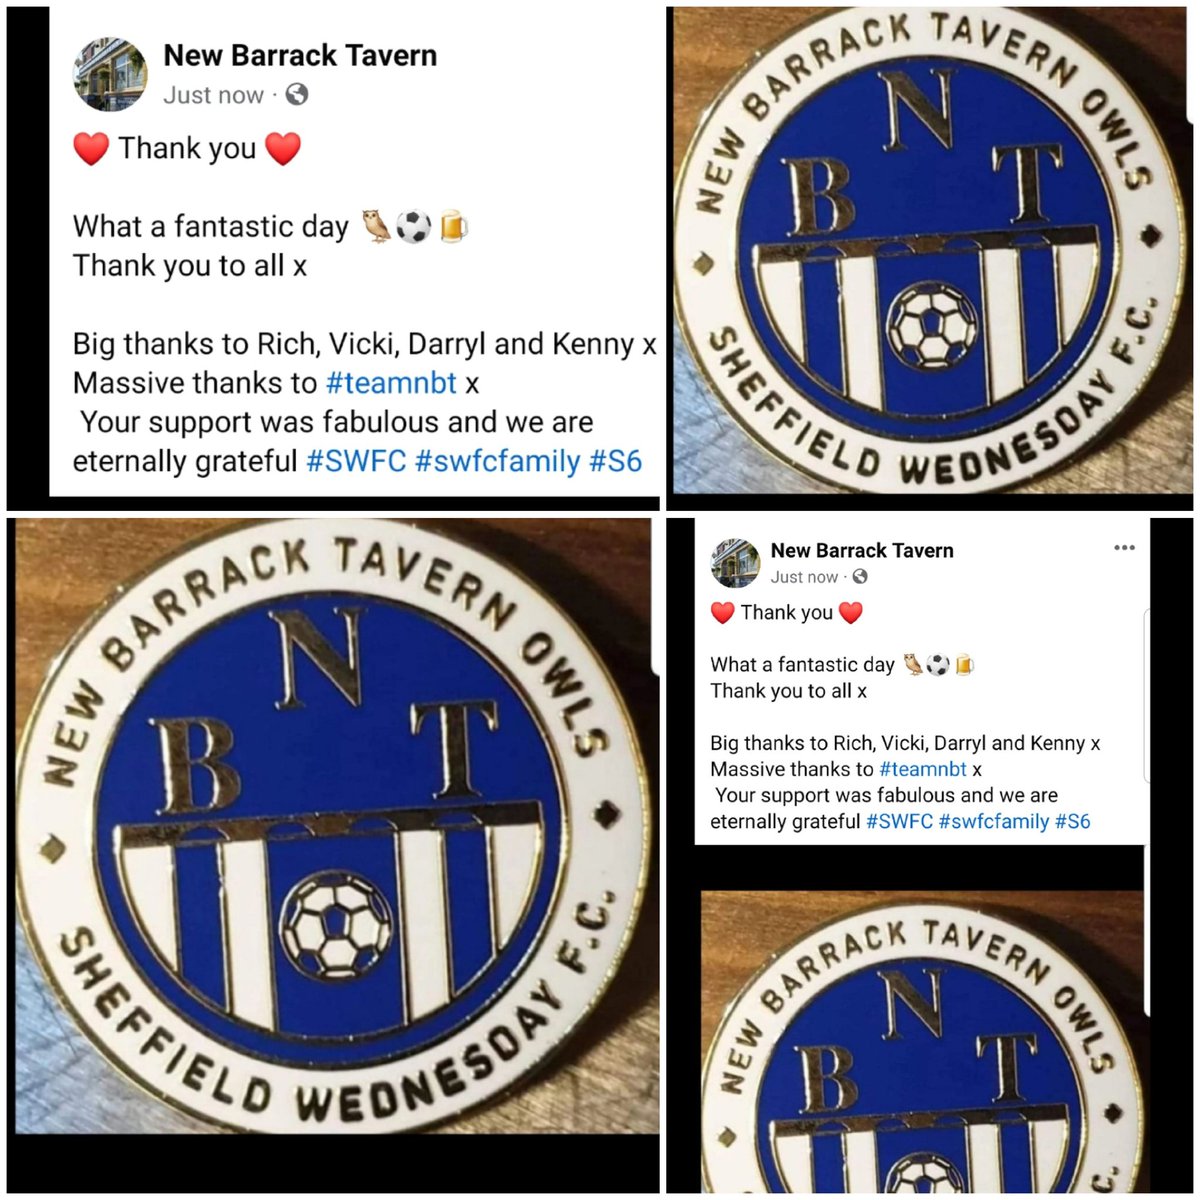 ❤ Thank you ❤
Massive day yesterday 🦉⚽️🍺
Your support was amazing and we are extremely grateful thank you, thanks to our #teamnbt and our vinyl DJs @rellorts @dollshead #kennystours n Darryl xx #SWFC #swfcfamily #S6 #Hillsborough #Sheffield #familyrunpub #familybusiness